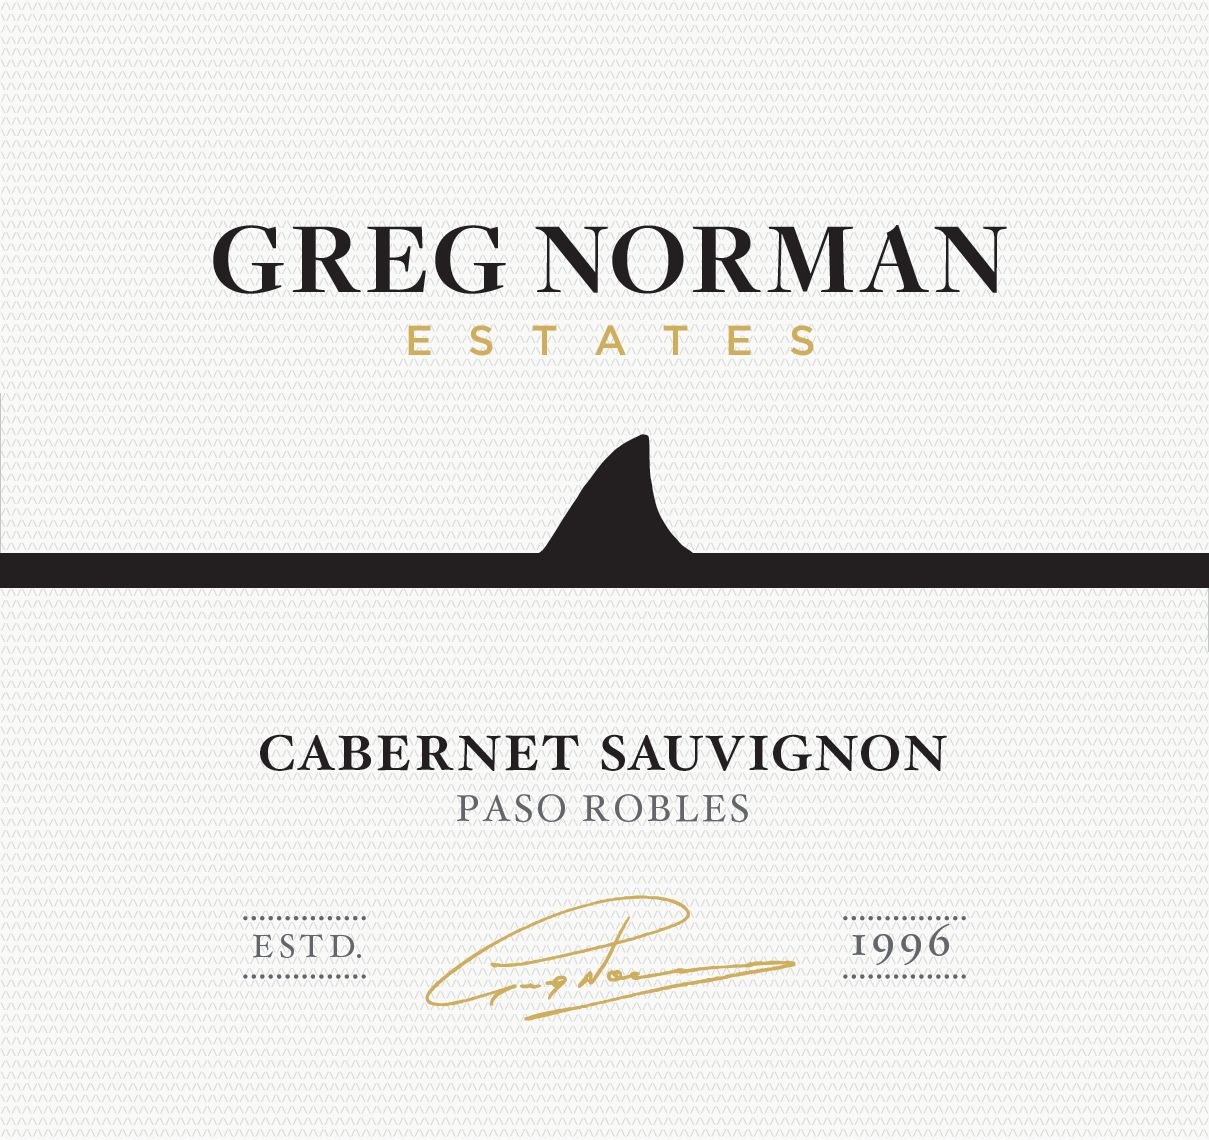 Greg Norman Estates Wine Learn About Buy Online Wine Com